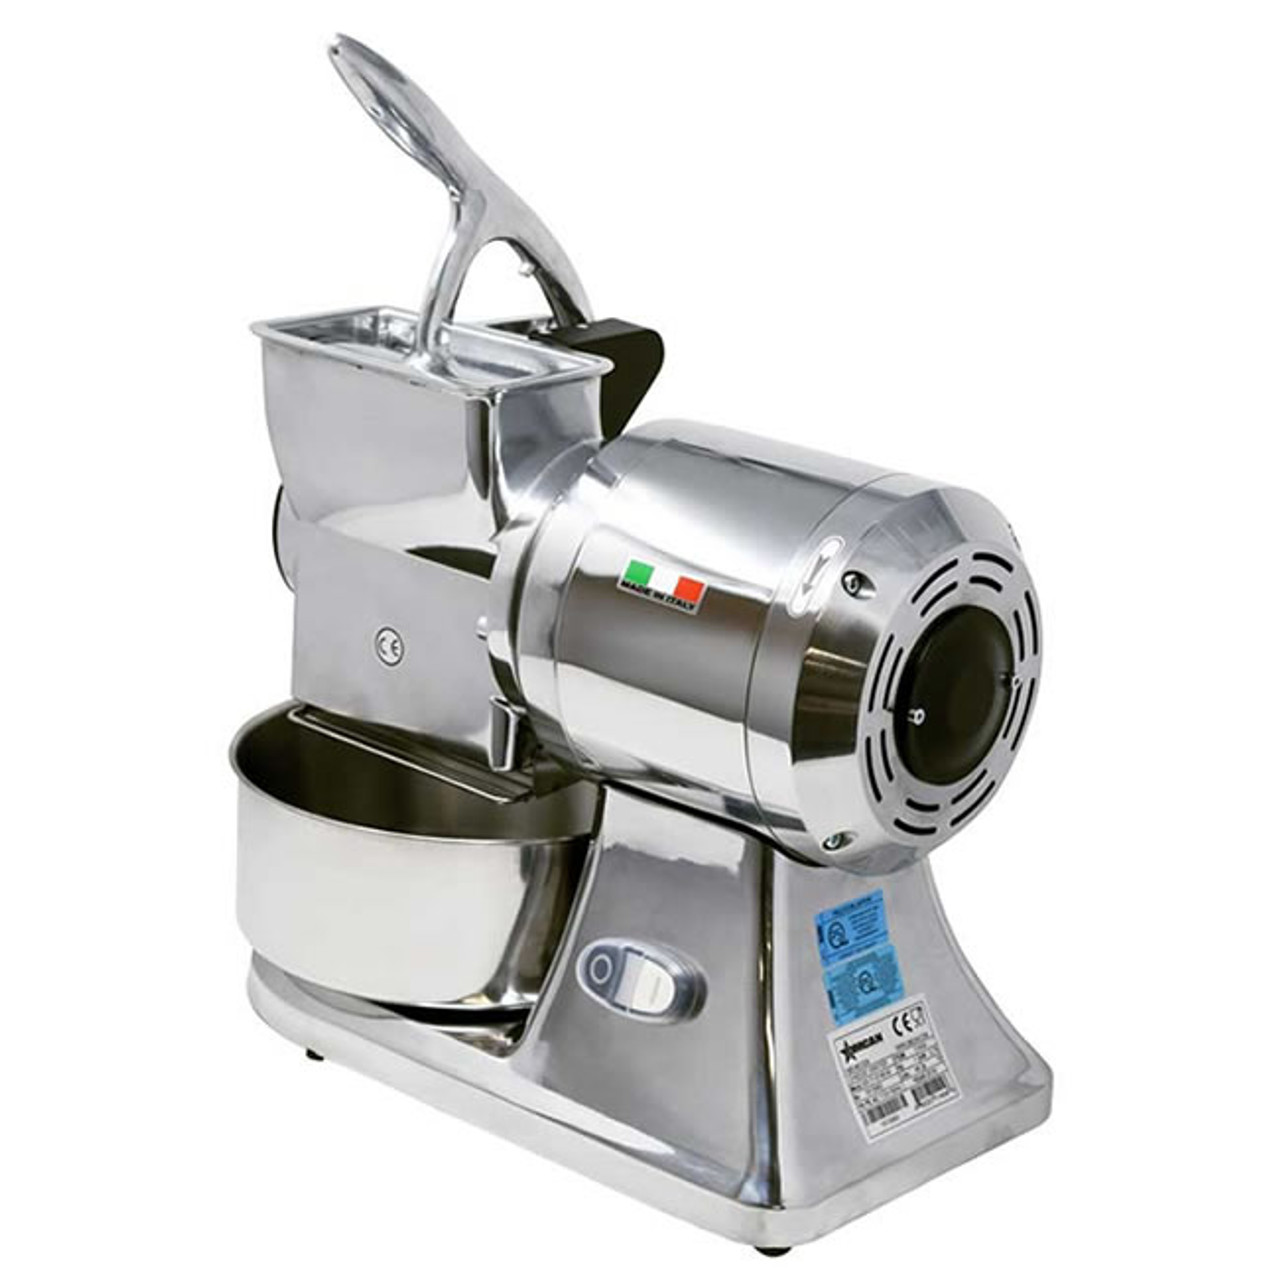 TRE SPADE electric parmesan grater from Italy